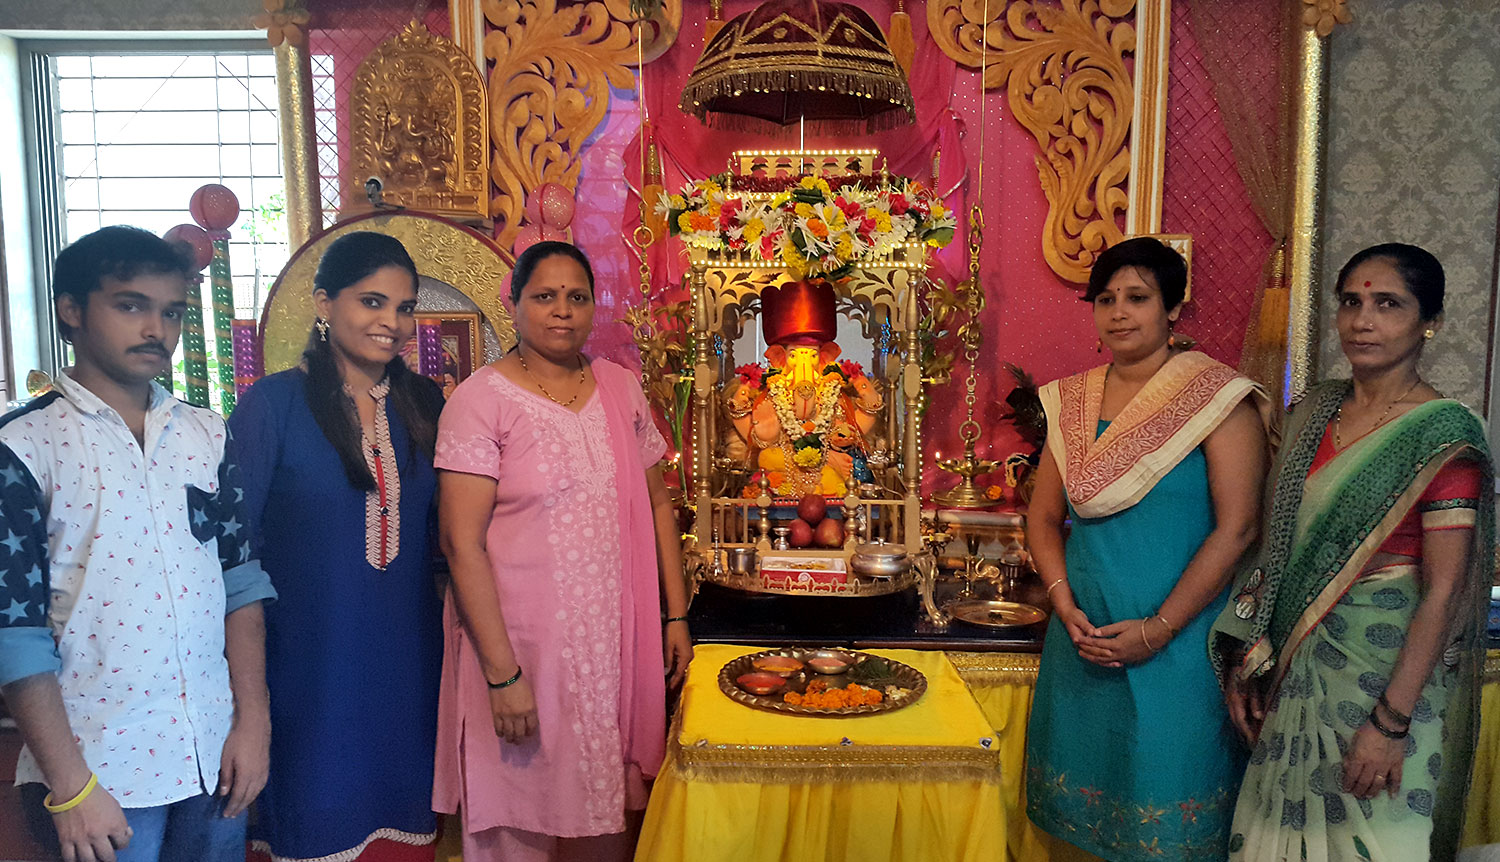 Staff visiting the women during ther festival of Ganesh Chaturthi (September, 2015)